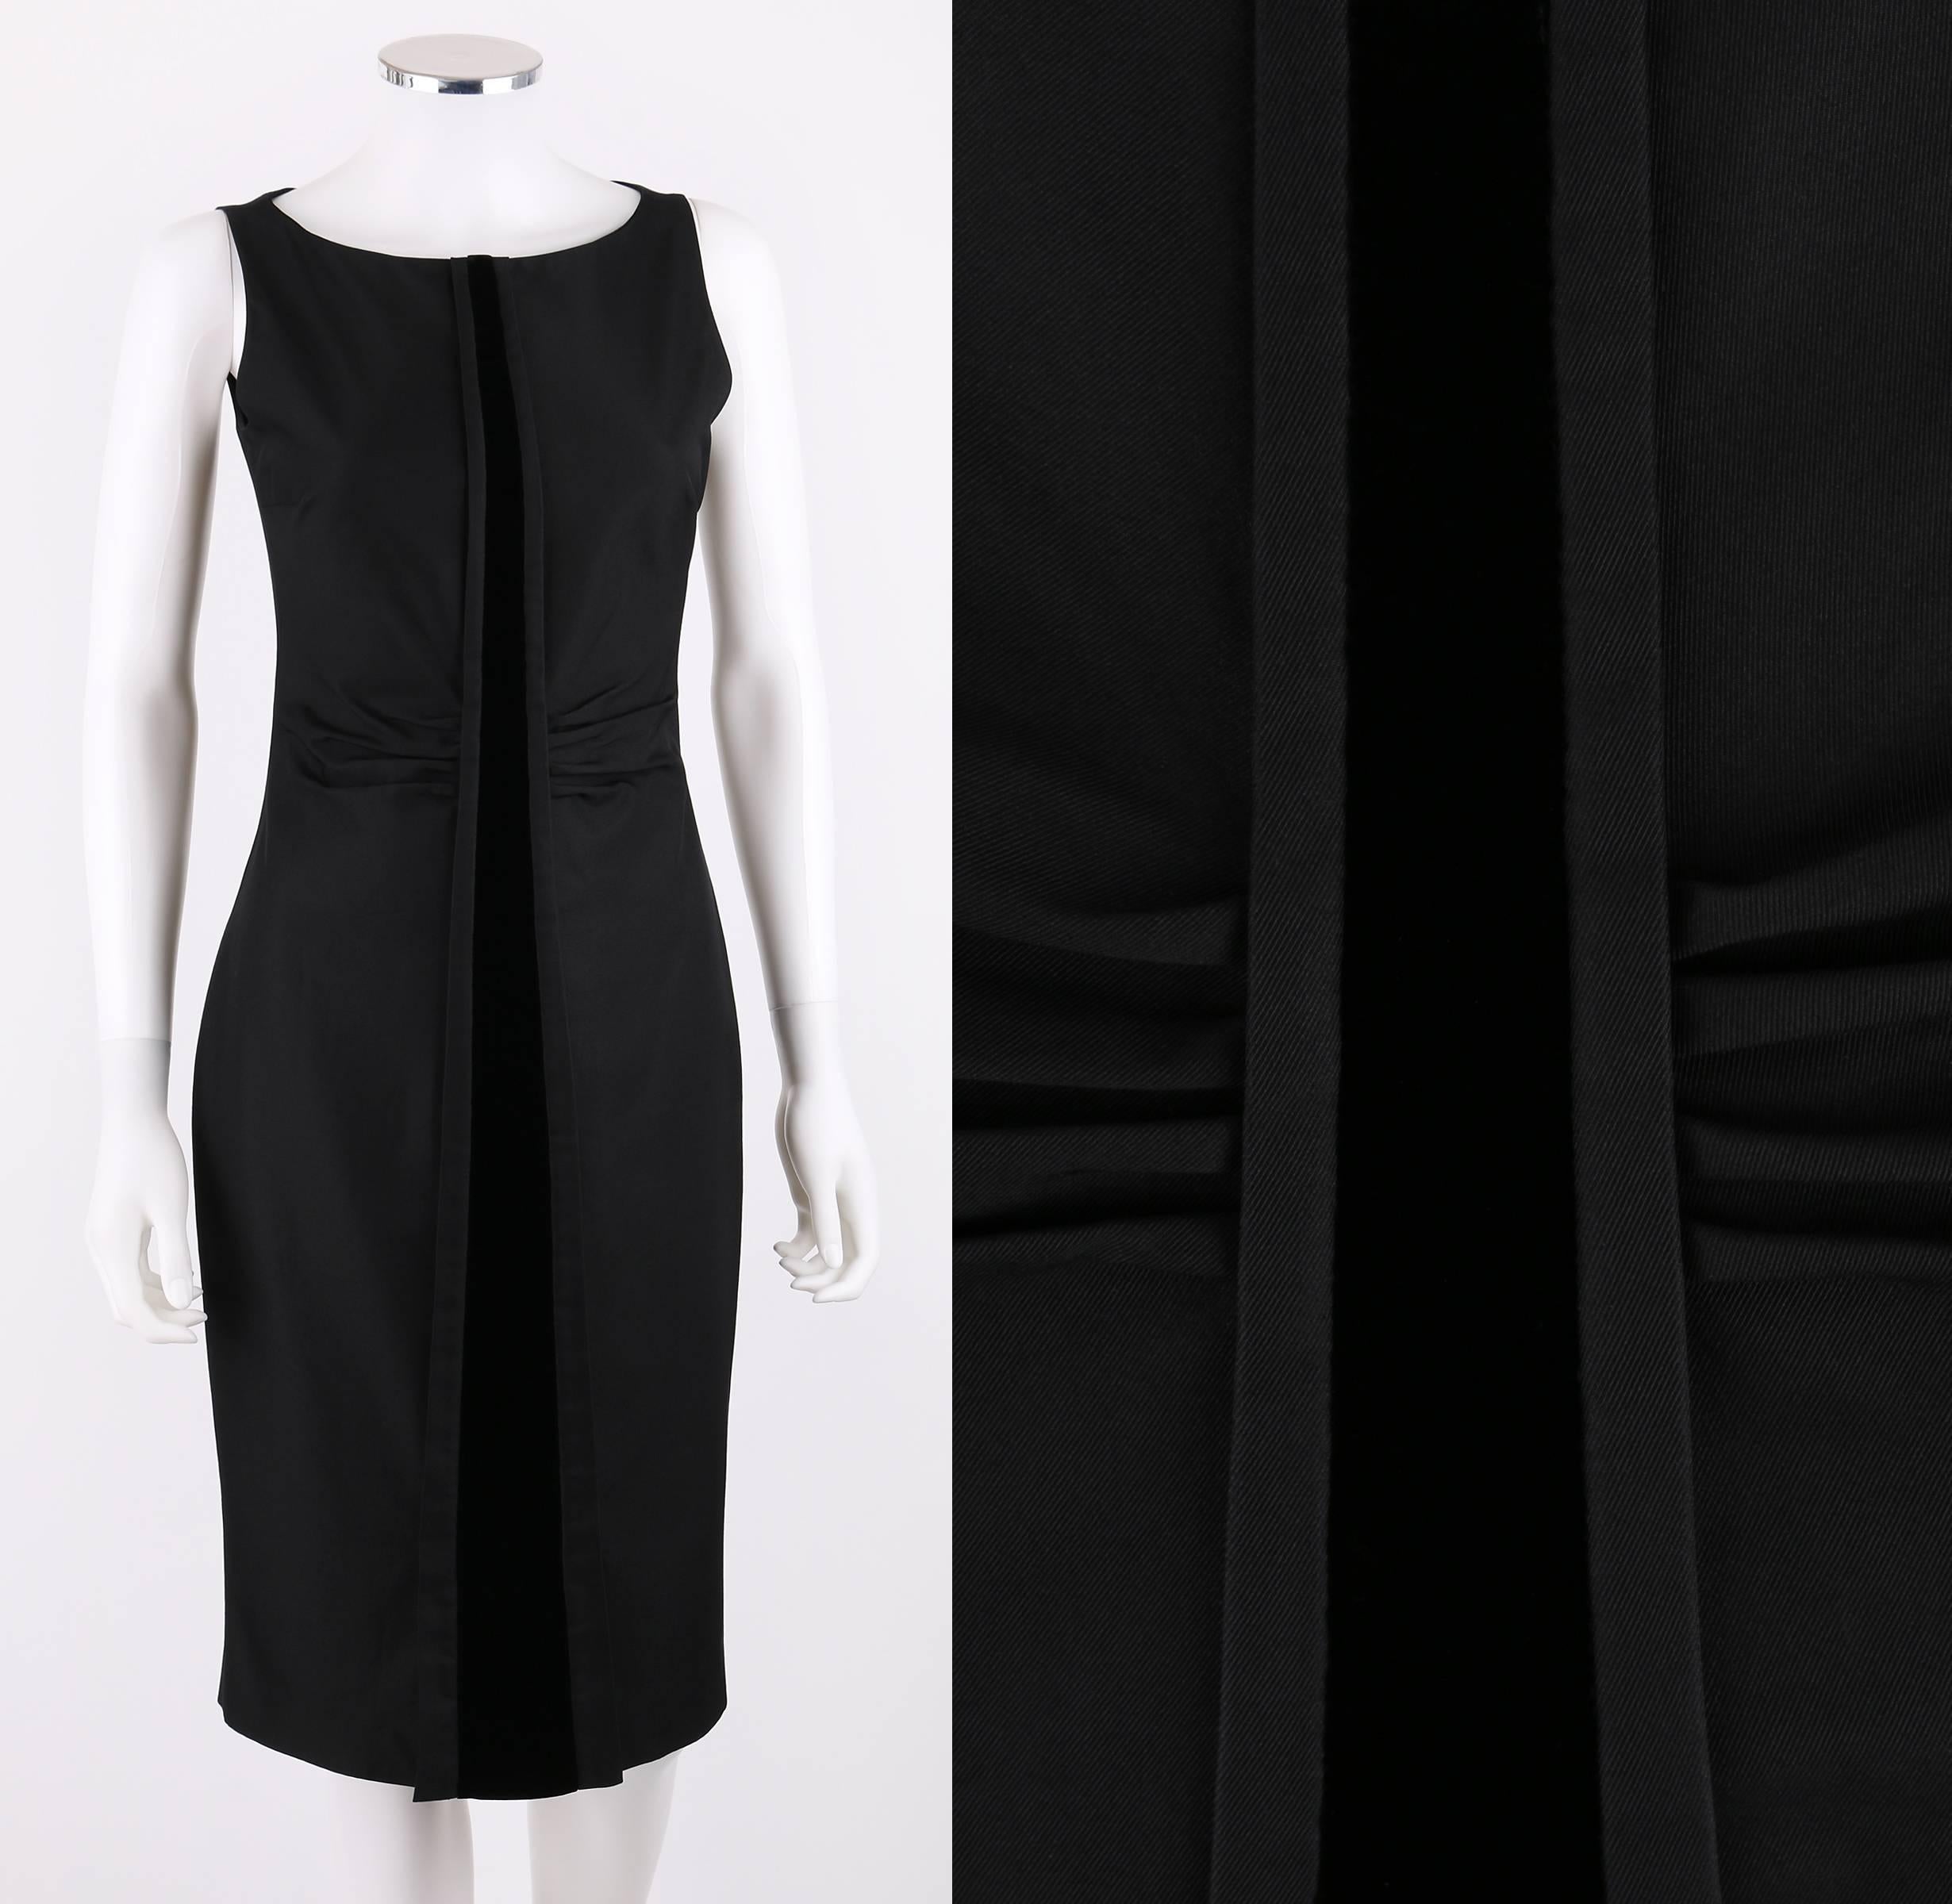 Gucci A/W 2004 black sheath dress designed by Tom Ford. Bateau neckline. Sleeveless. Front box pleat detail at waist. Center front and back velvet panel. Two front and back vents. Side seam zipper with hook and eye closure at top. Fully lined.